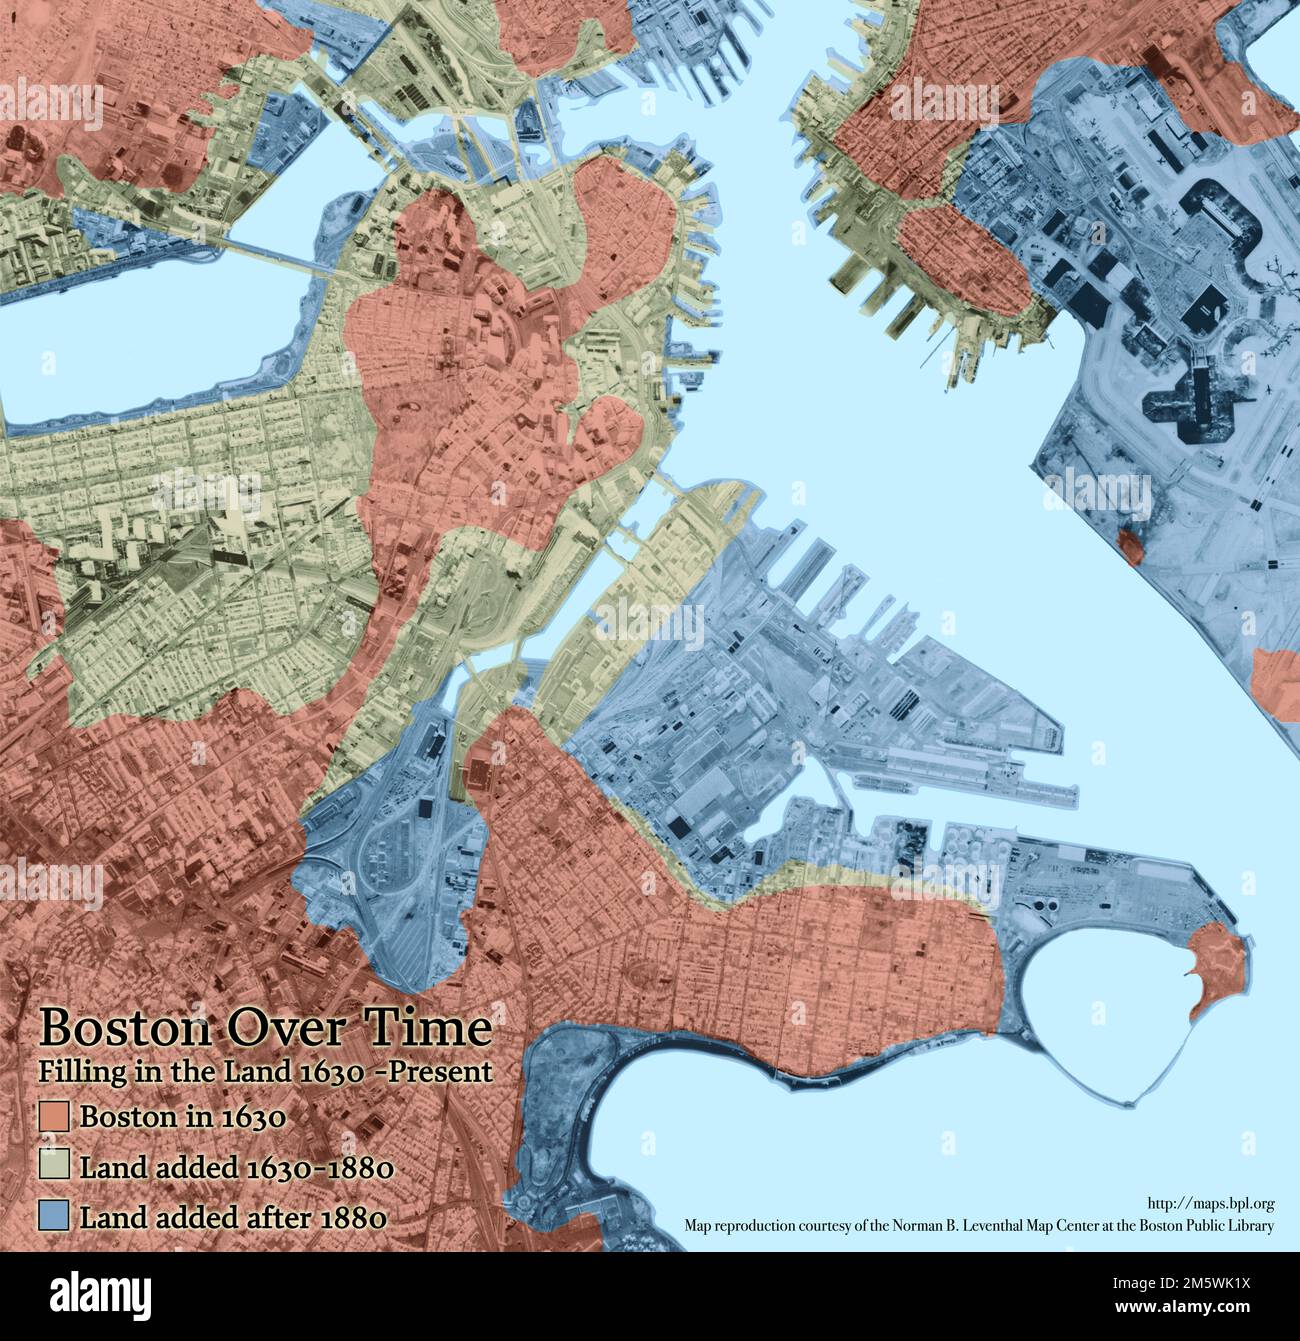 Boston Over Time : filling in the land 1630 - present. Shows Boston in 1630, 1880 and 2009. Created for the Boston and Beyond exhibition at the Norman B. Leventhal Map Center, 2008.. Beneath Our Feet: This modern map illustrates the various 'land making' projects that have shaped Boston over the past three centuries, along with locations where the five artifacts on display here were unearthed. The pink landmass represents the original Shawmut Peninsula and mainland region, where Native Americans dwelled for millennia, and where Puritan colonists settled in 1630. The tan area represents land ma Stock Photo